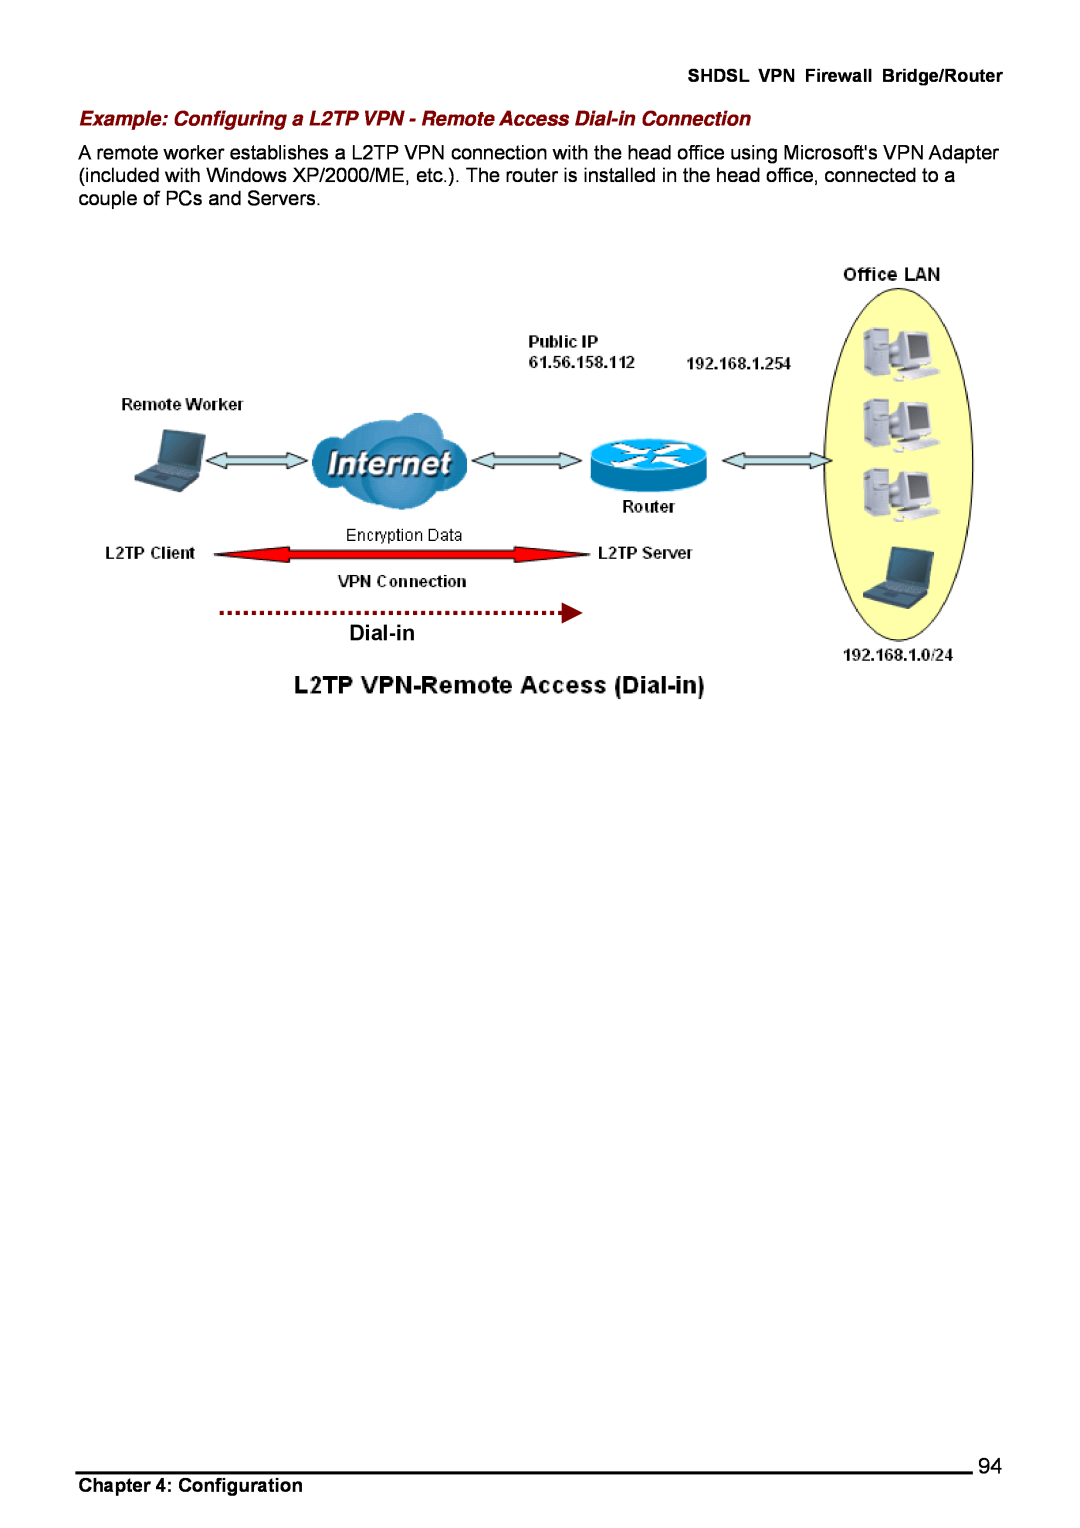 Billion Electric Company 8501 Example Configuring a L2TP VPN - Remote Access Dial-in Connection, Configuration 